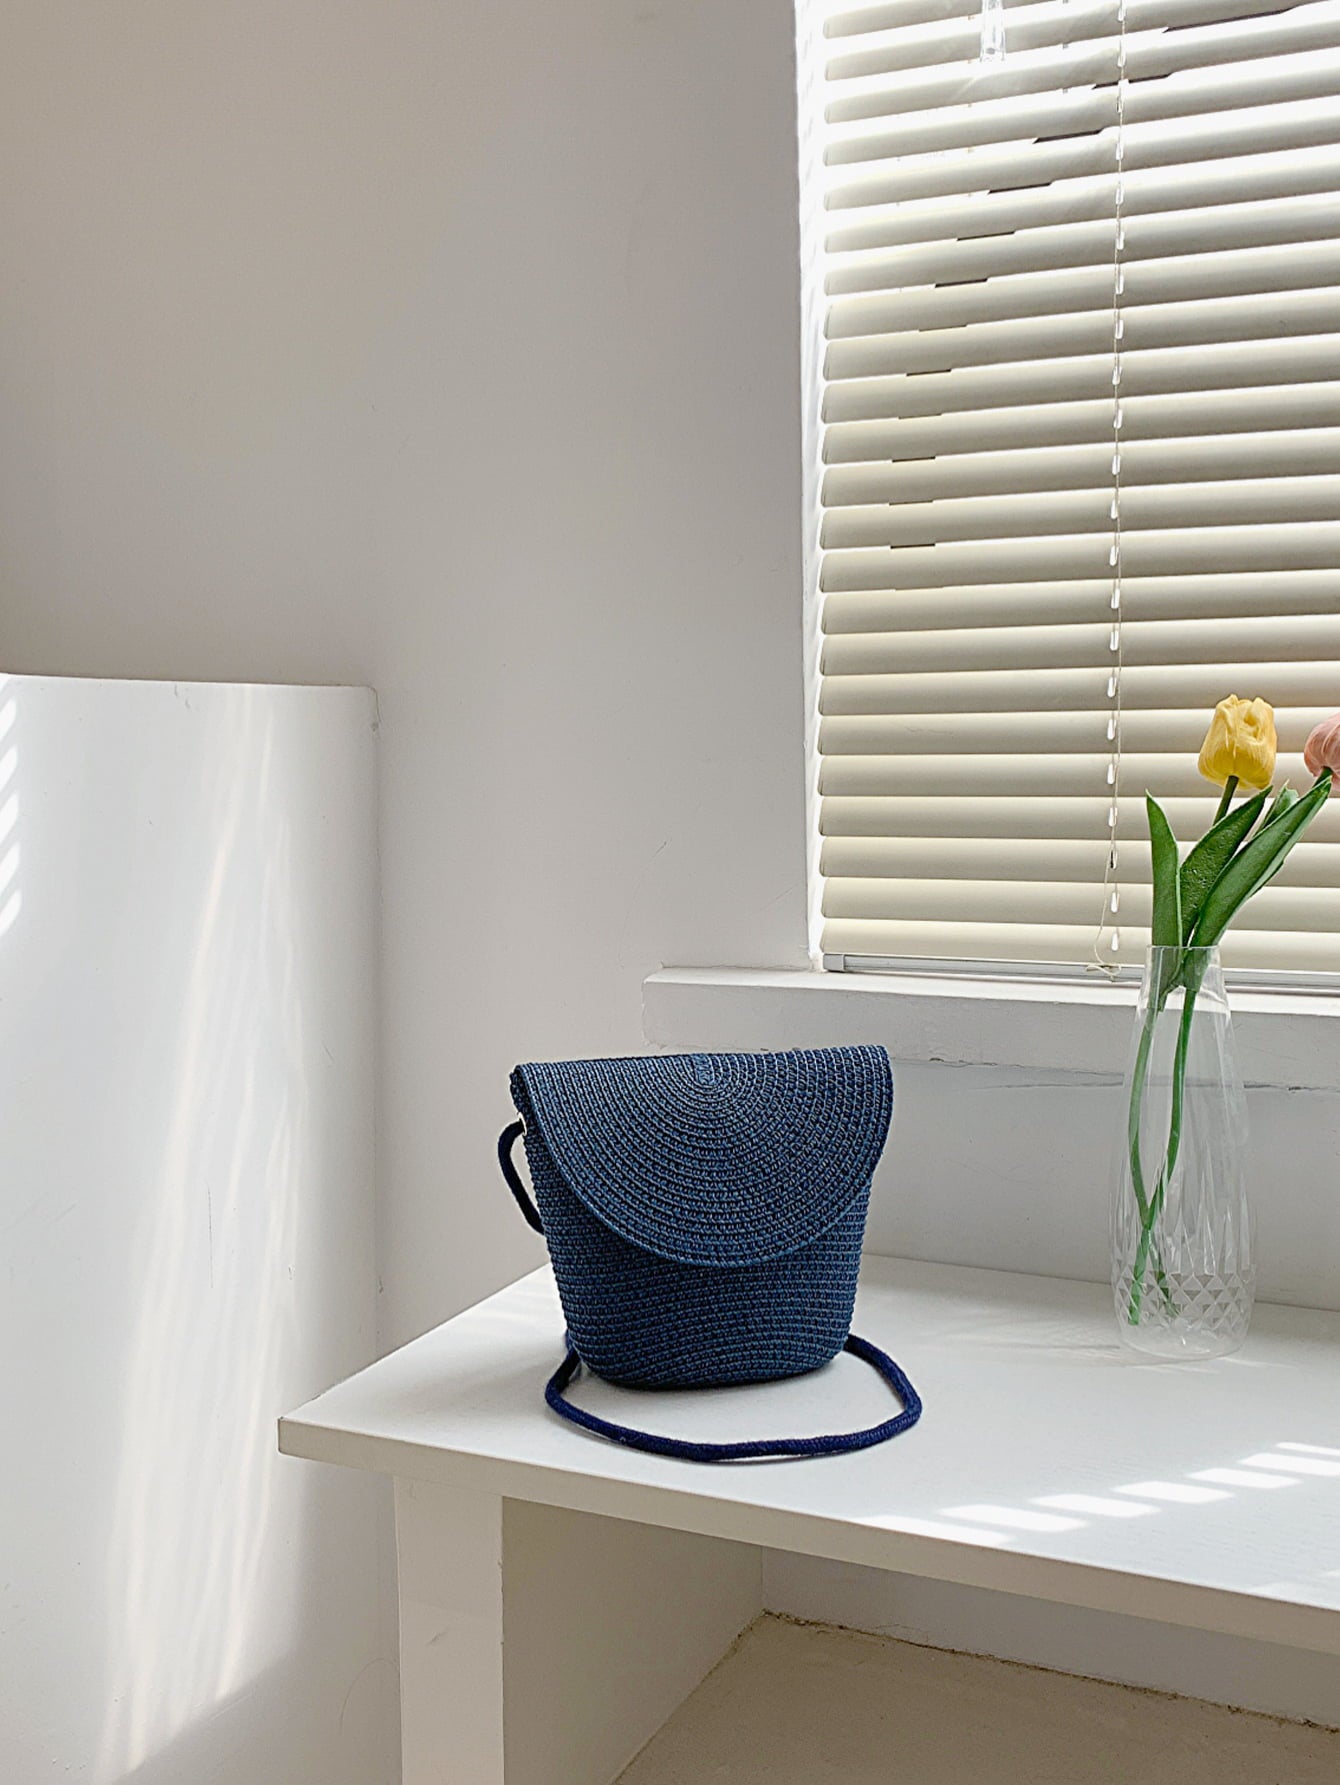 crochet shoulder handbag, peacock blue, on countertop near window with white blinds, tulips in a vase